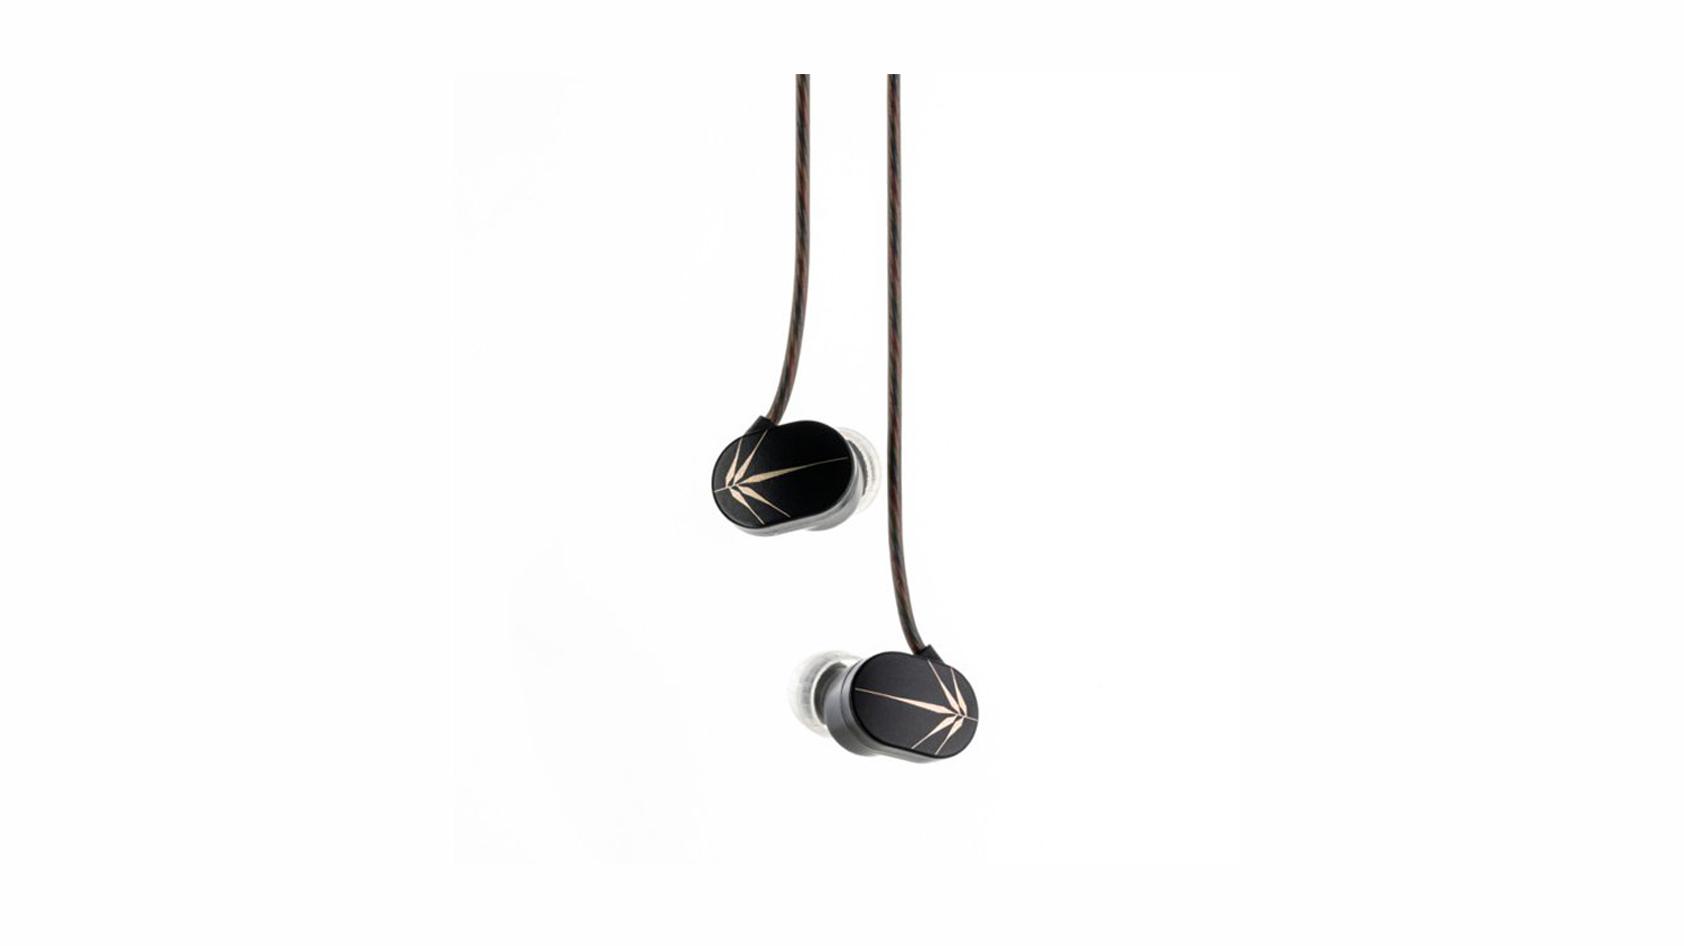 A pair of Moondrop Chu earbuds dangle in front of a blank background.